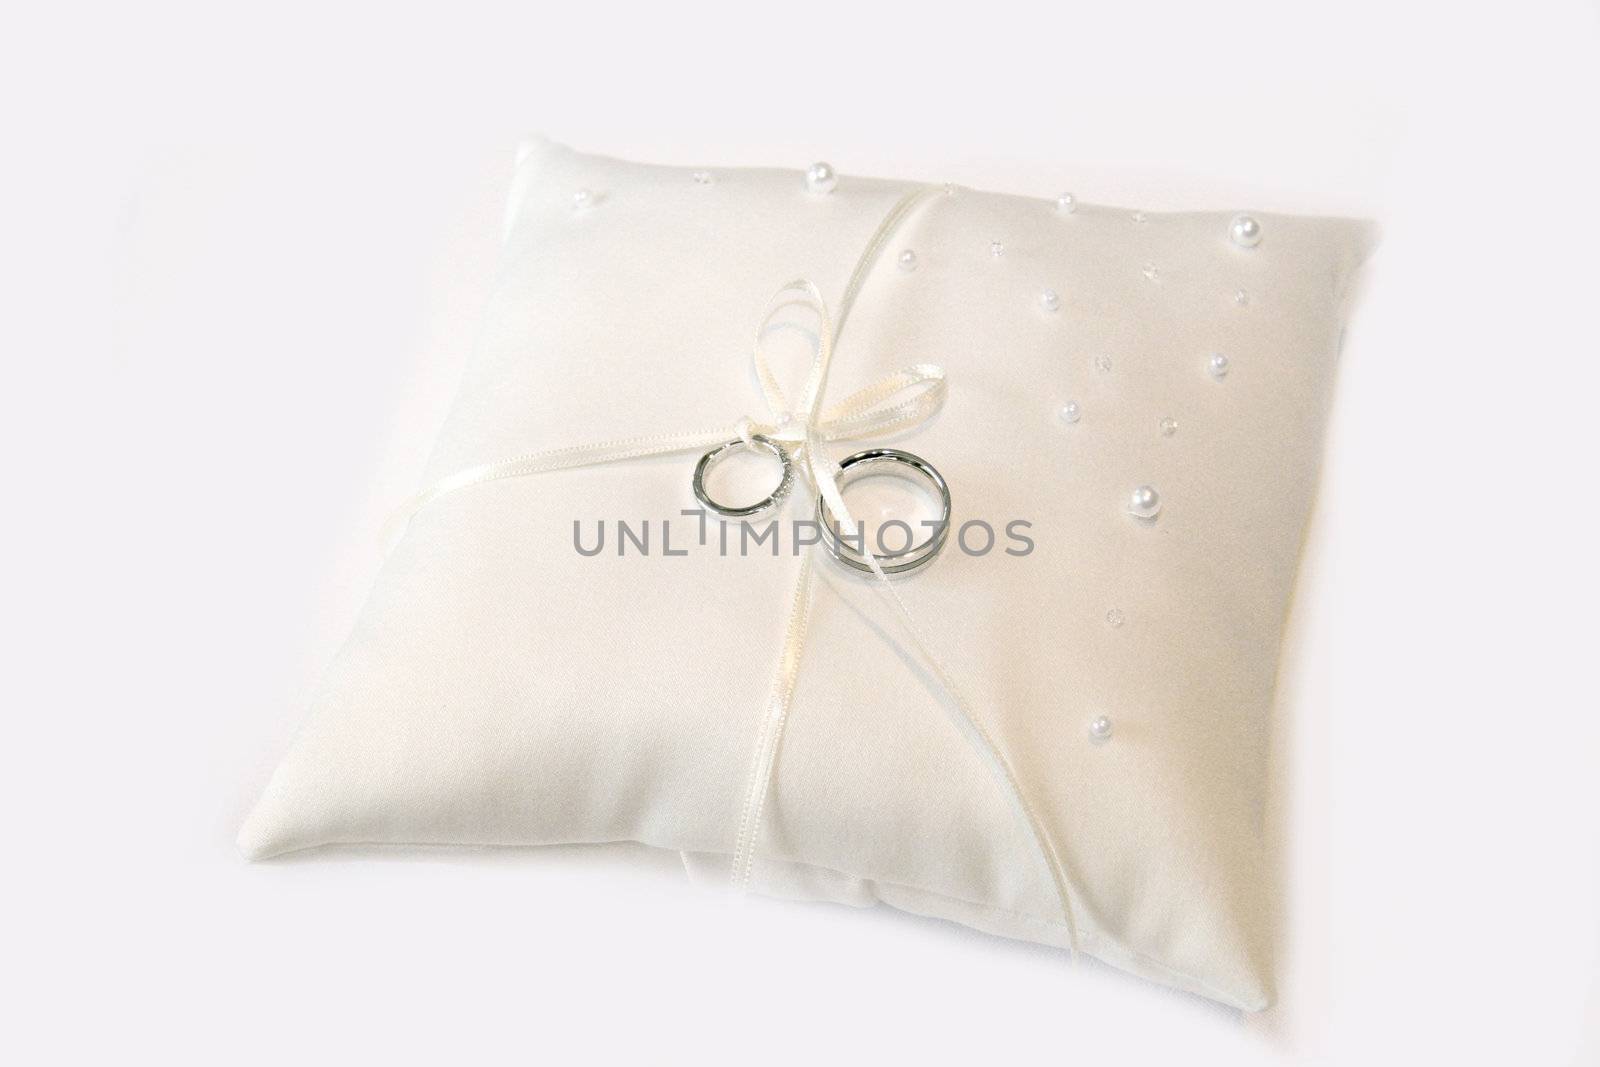 wedding rings on a pillow by Farina6000